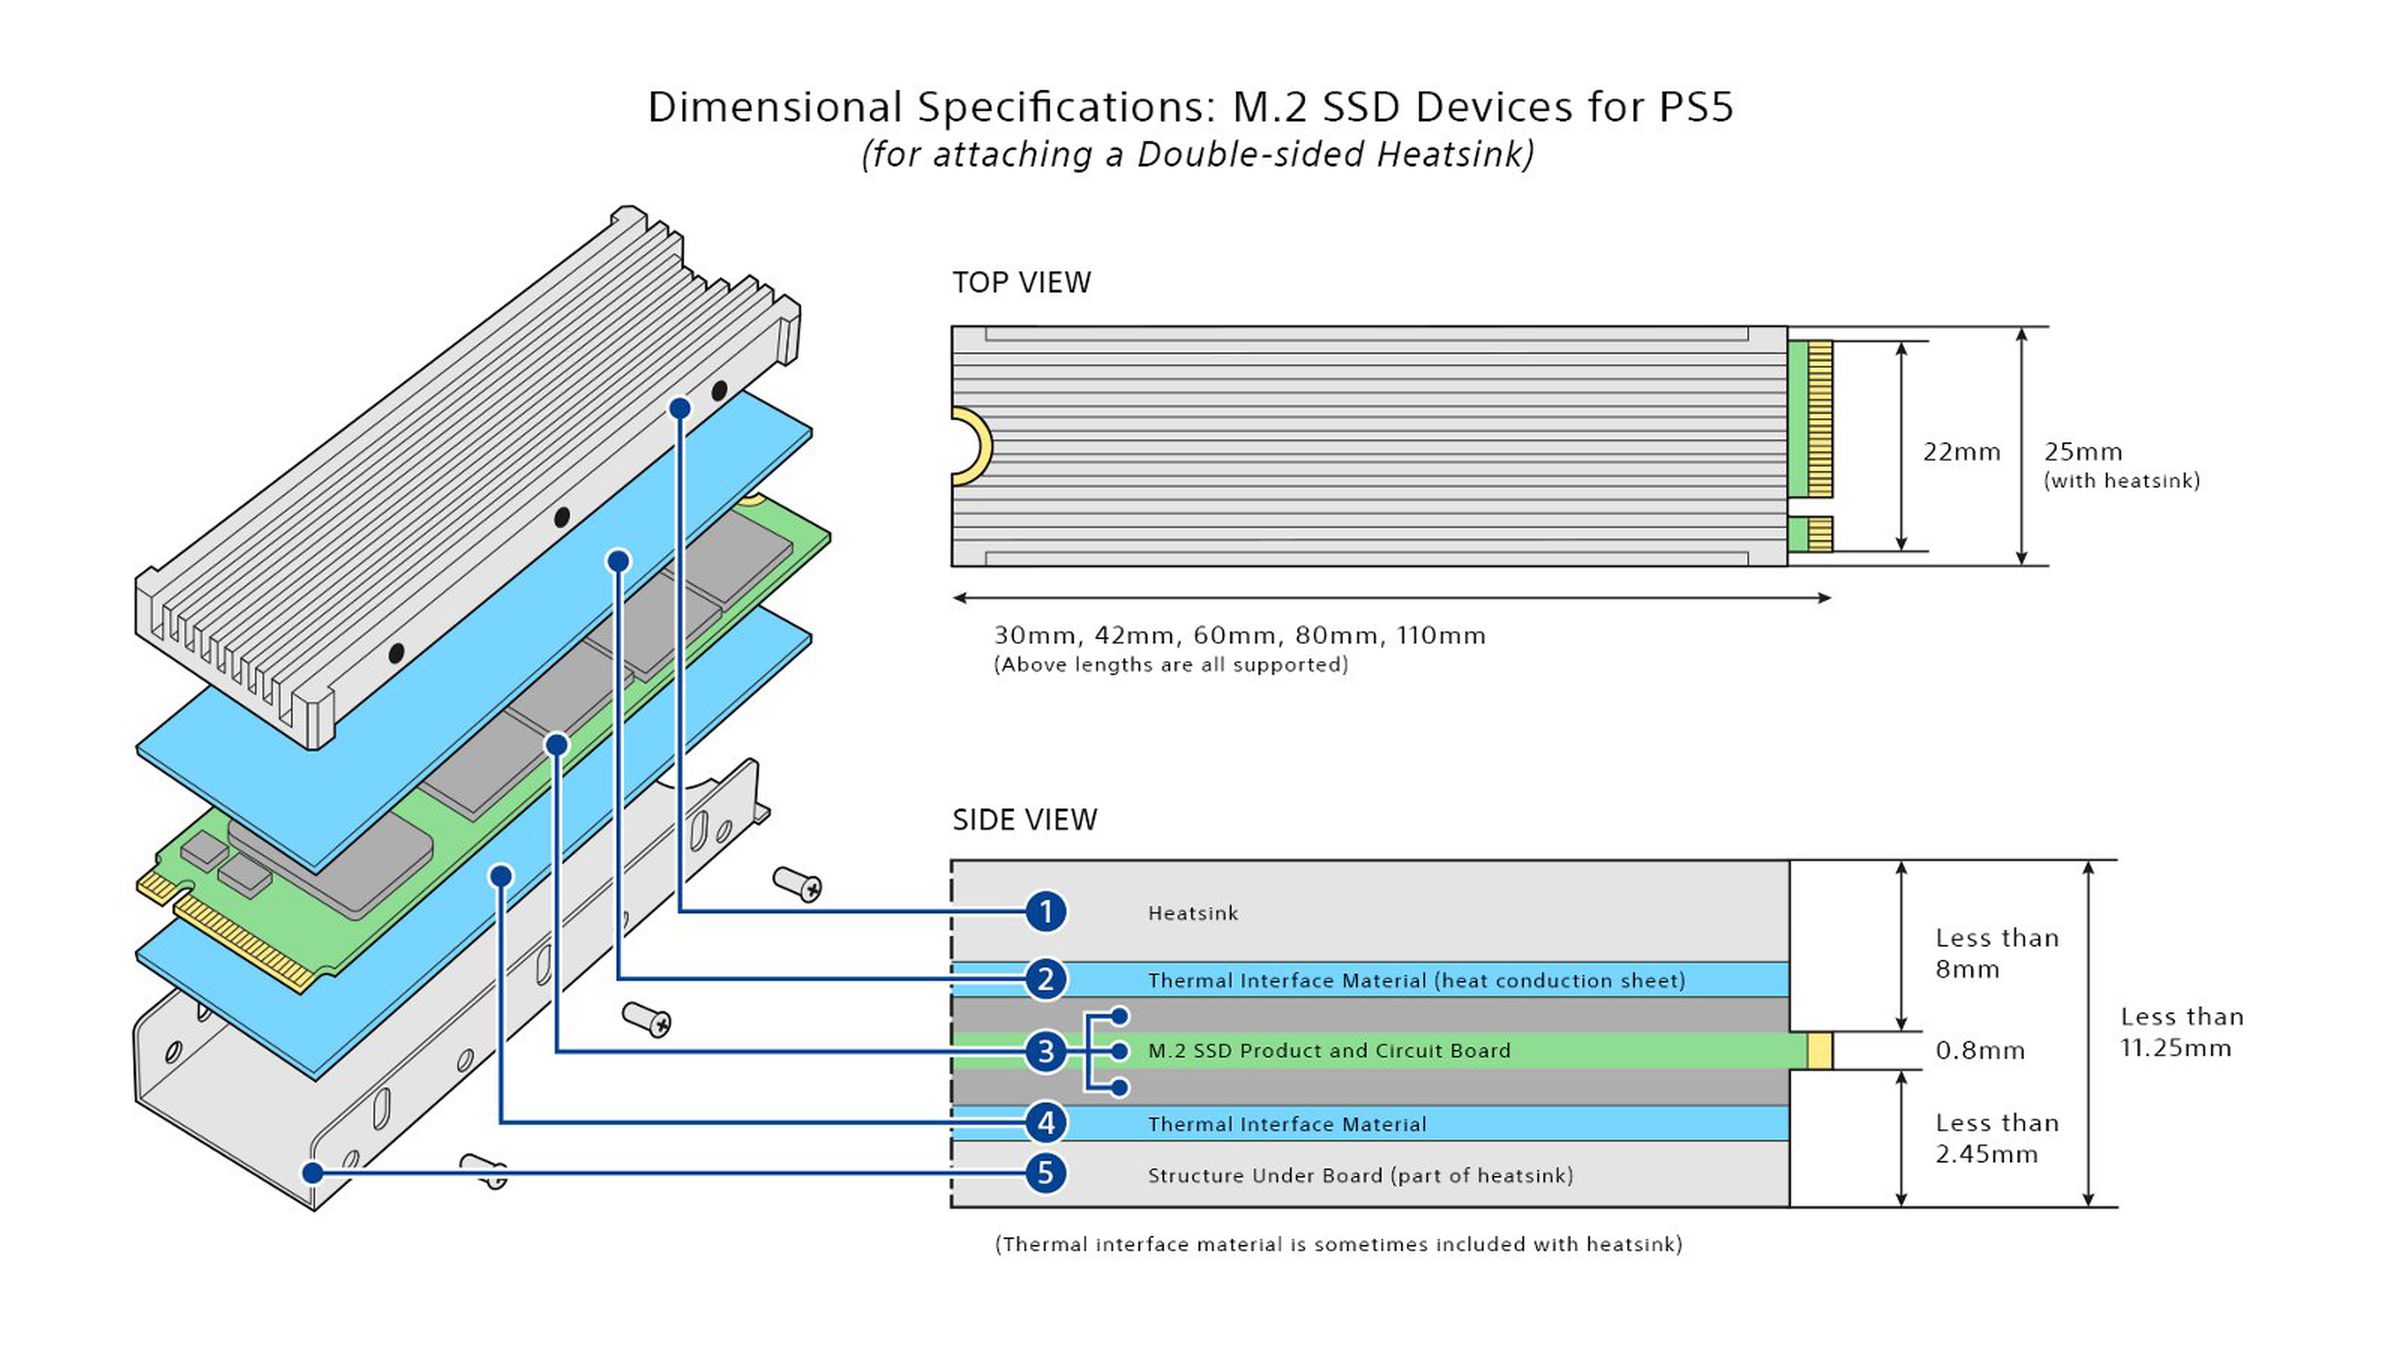 Sony has very specific size / spacing requirements for SSD heatsinks, so you’ll want to pay close attention.